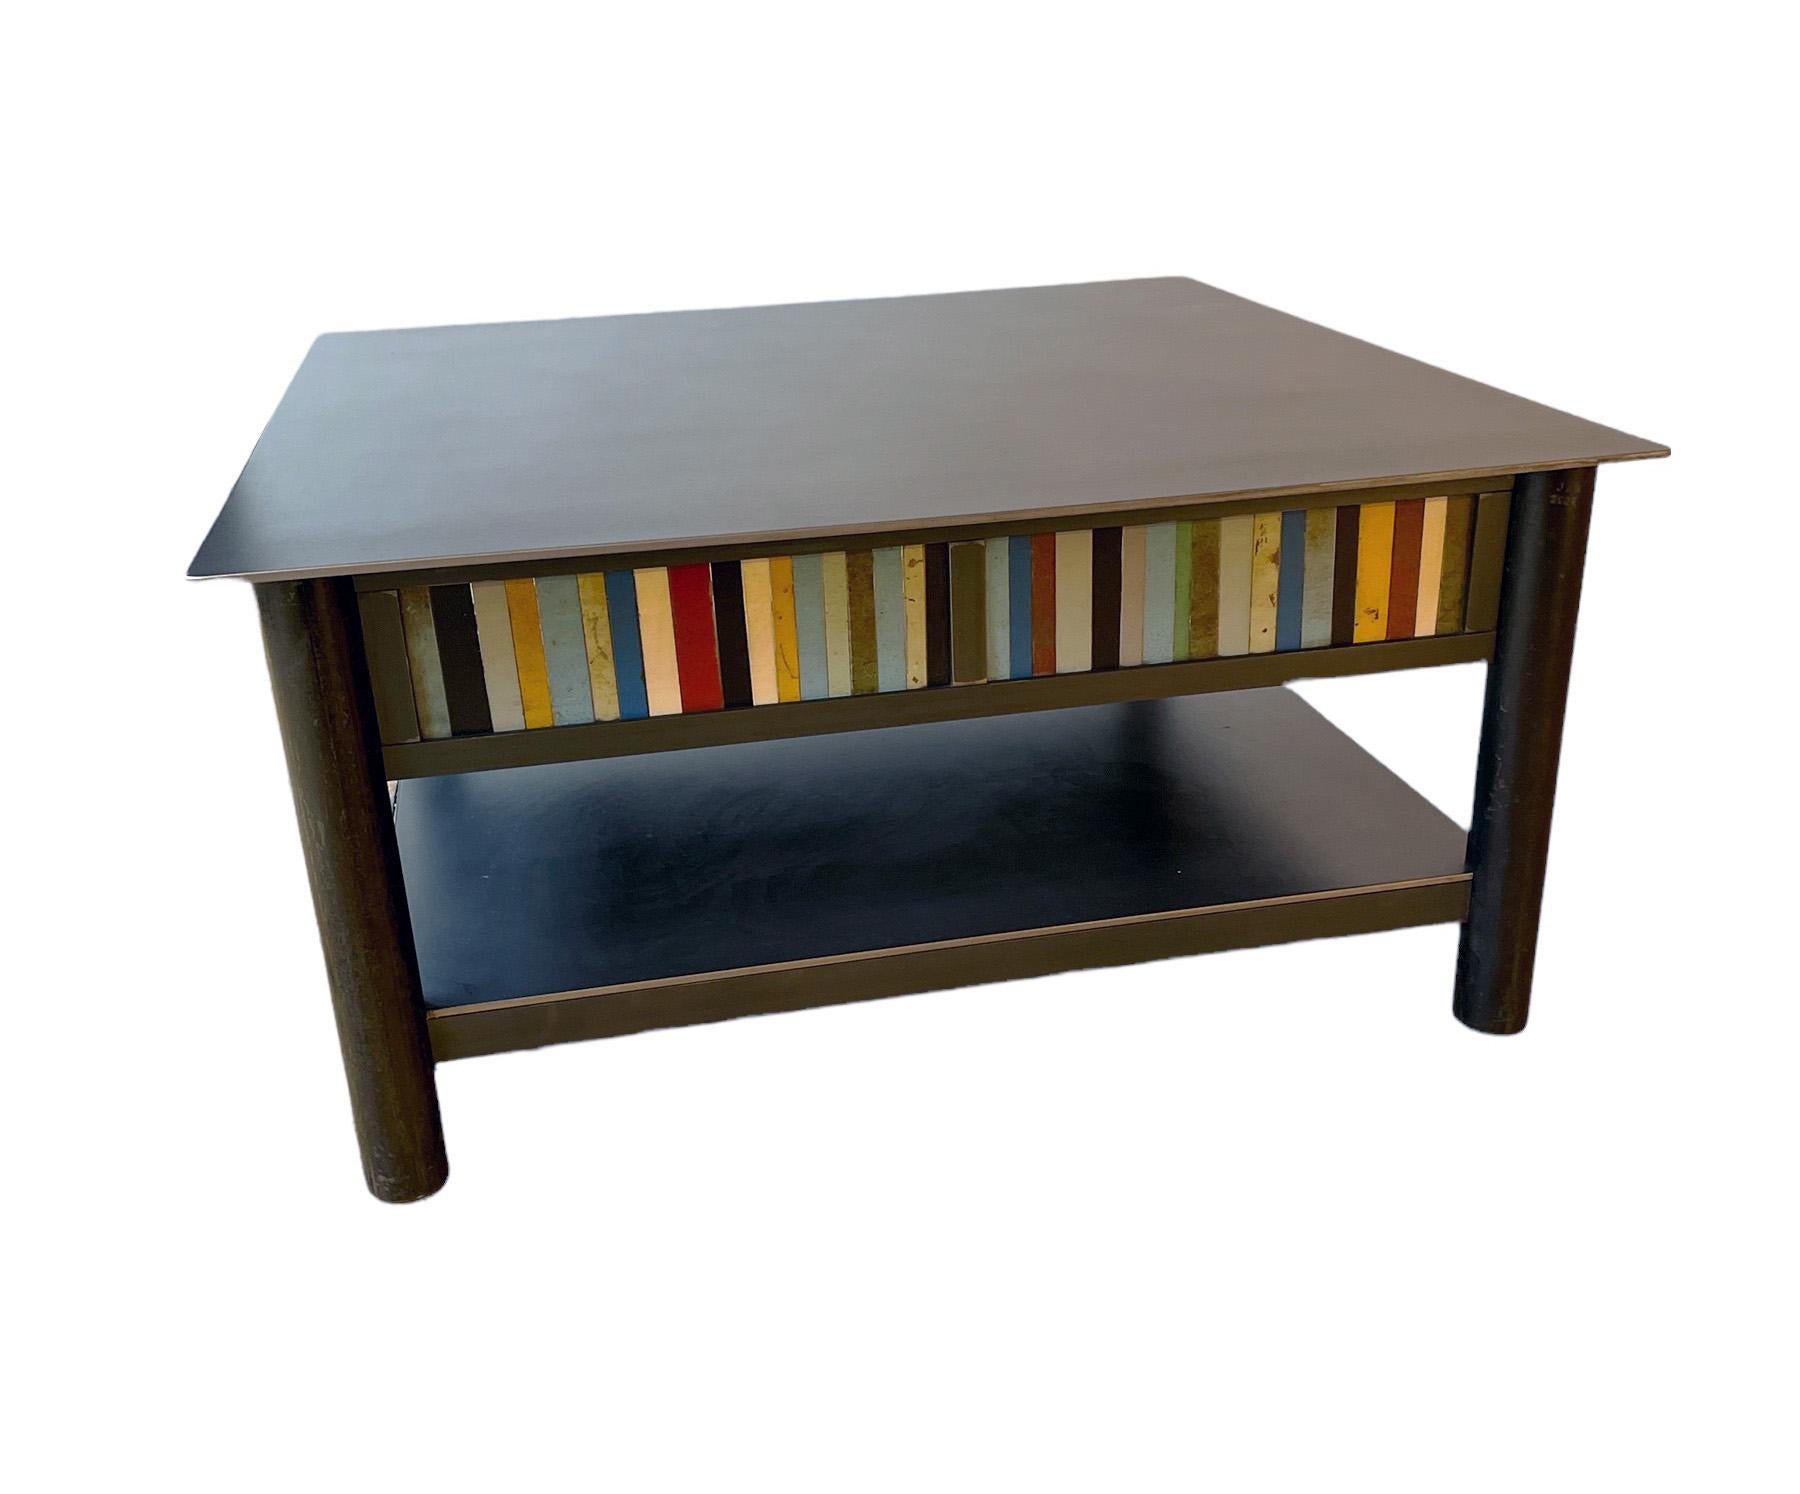 Mid-Century Modern Jim Rose Steel Furniture, Square Coffee Table with Shelf and Multi-Color Panels